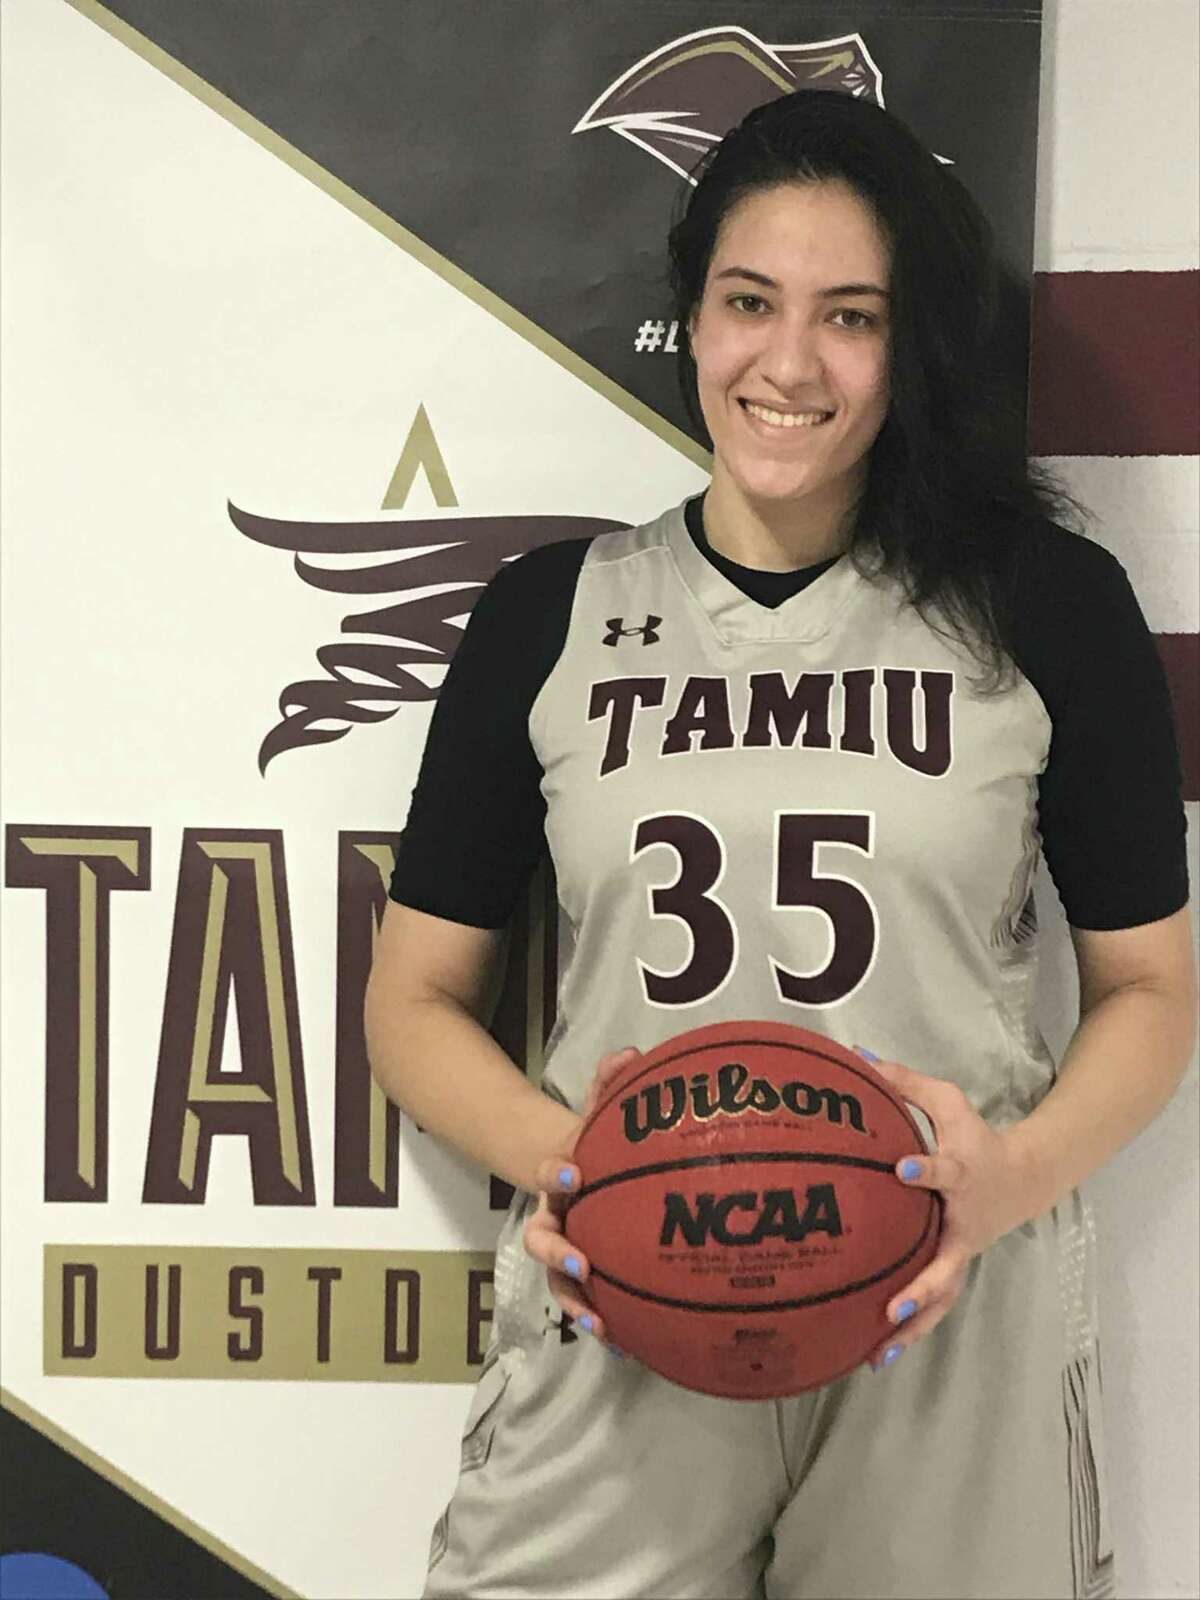 Julynne da Silva Sa was announced Wednesday as the latest addition to TAMIU’s team for the 2019-20 season as she transfers from Division I program Sacramento State.